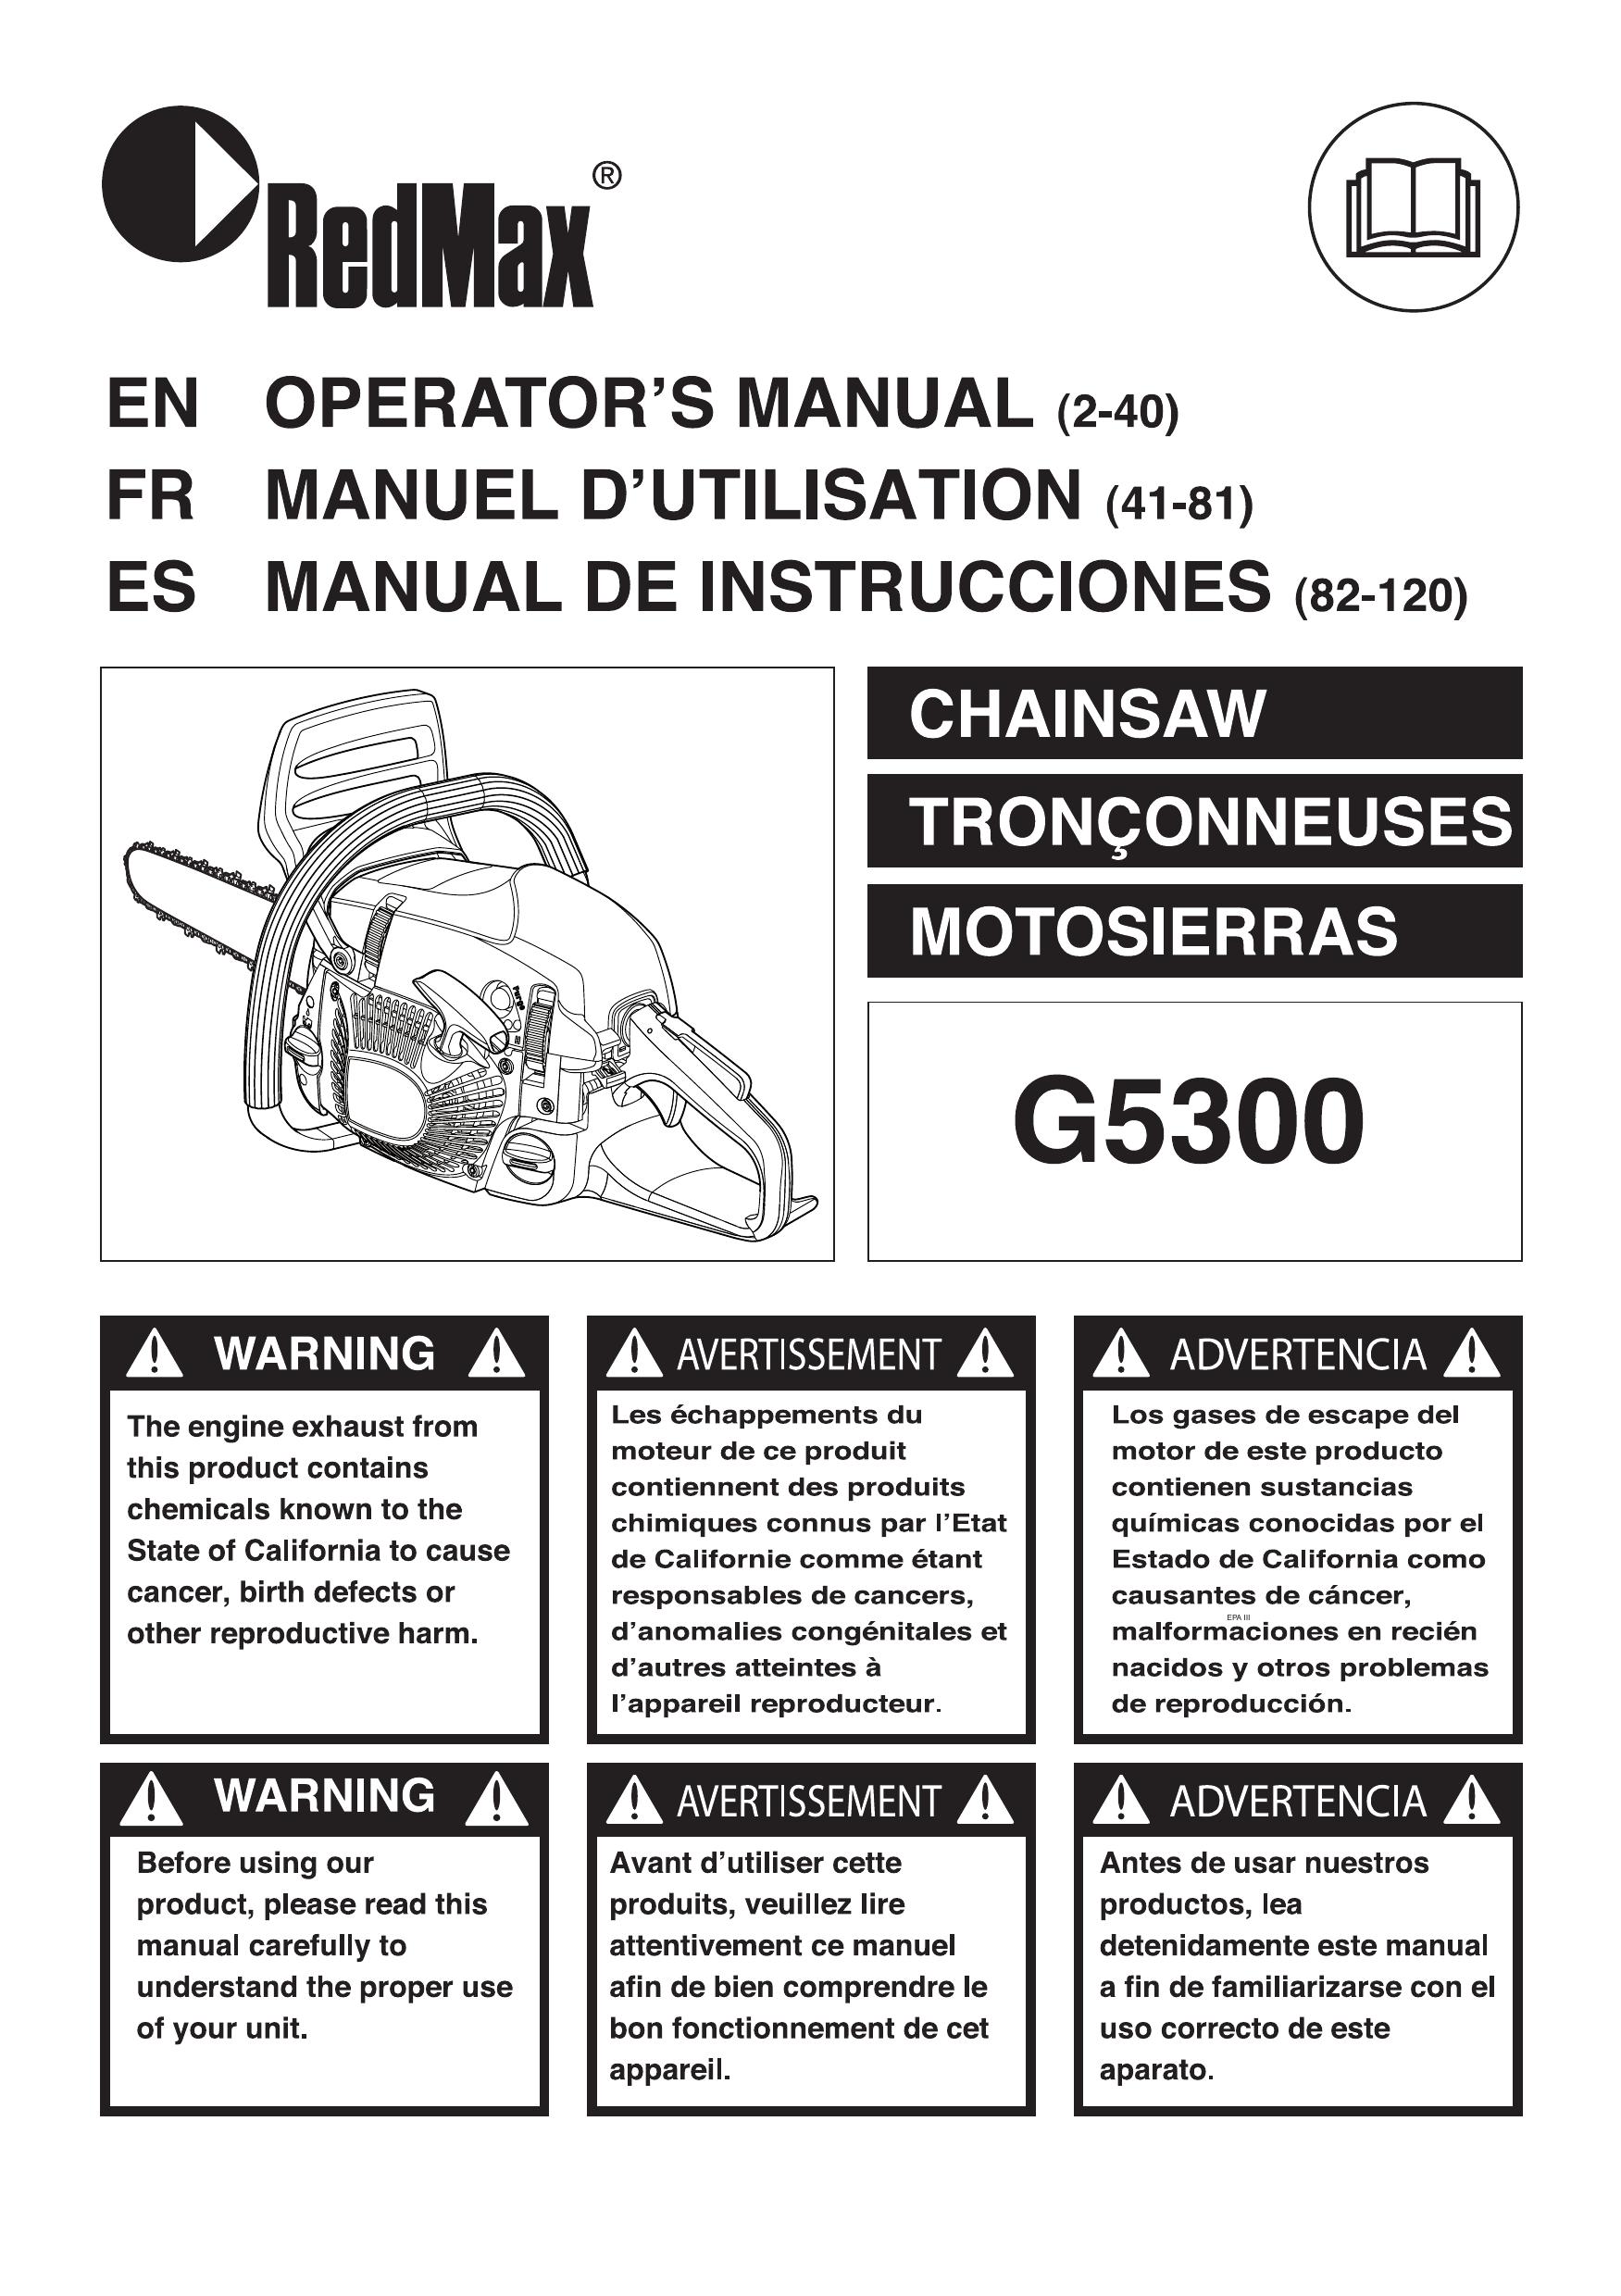 RedMax G5300 Chainsaw User Manual